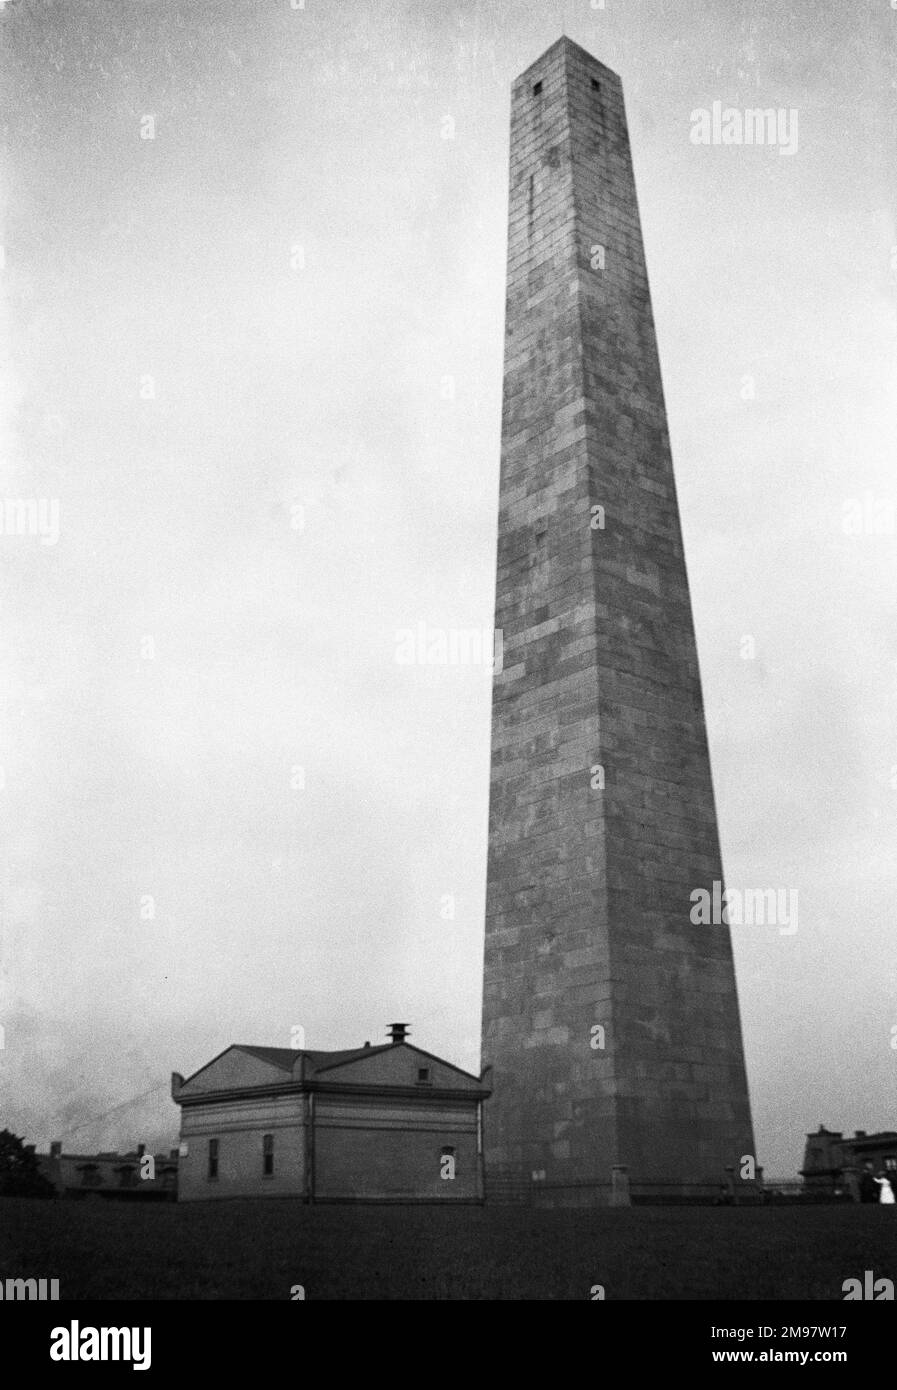 Built to commemorate the Battle of Bunker Hill, the first major conflict between British and Patriot forces in the American revolutionary war. Constructed between 1827-1843  67 meters high using granite from nearby Quincy. 294 steps to the top. Bunker Hill today is part of Boston Historic National Park. Stock Photo